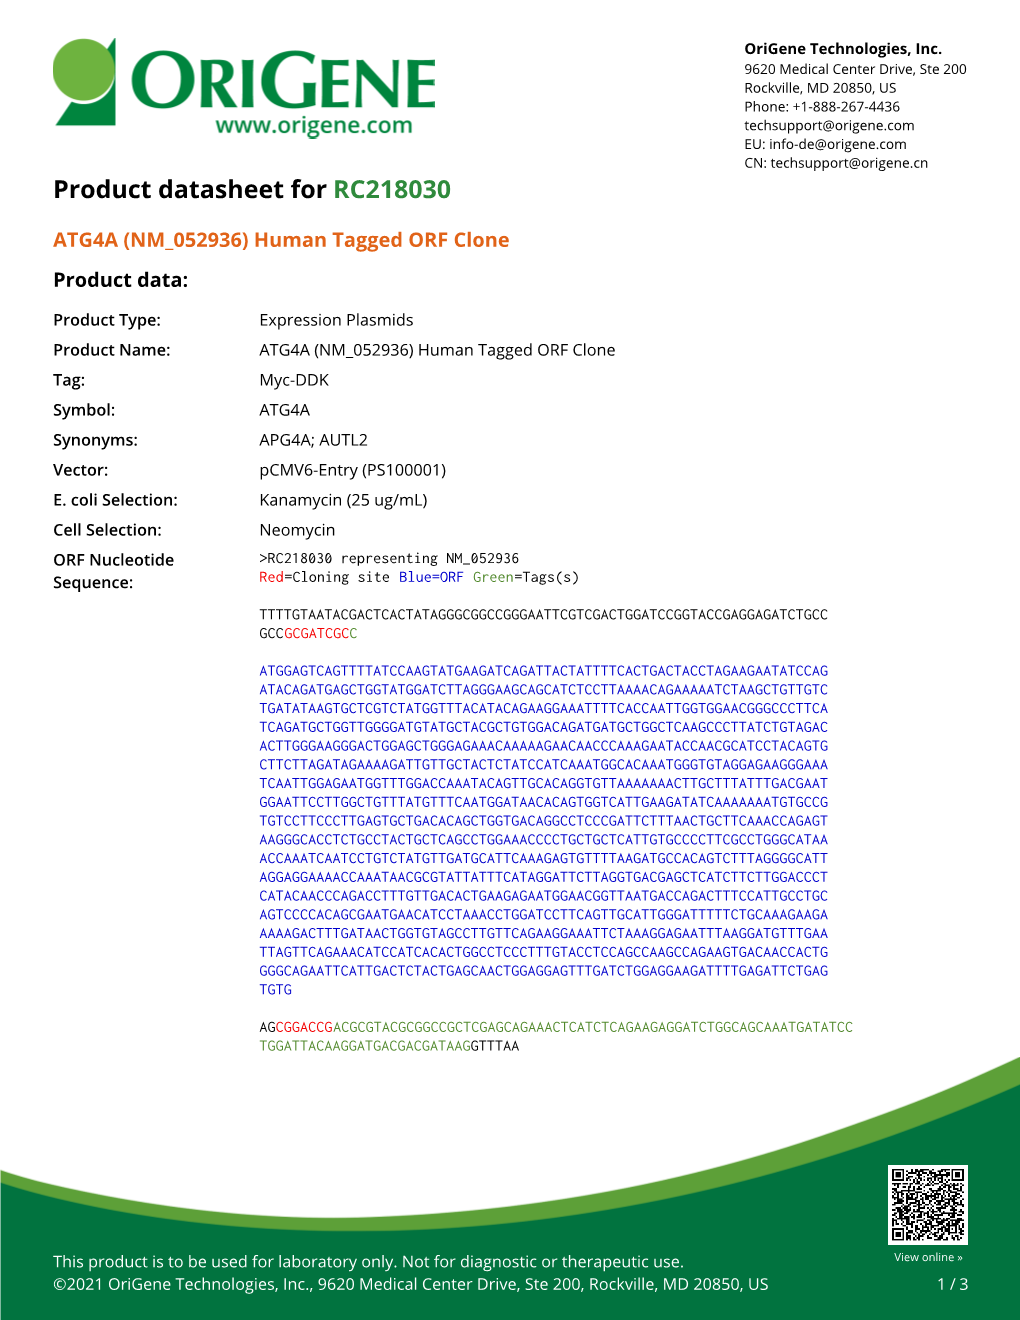 ATG4A (NM 052936) Human Tagged ORF Clone Product Data